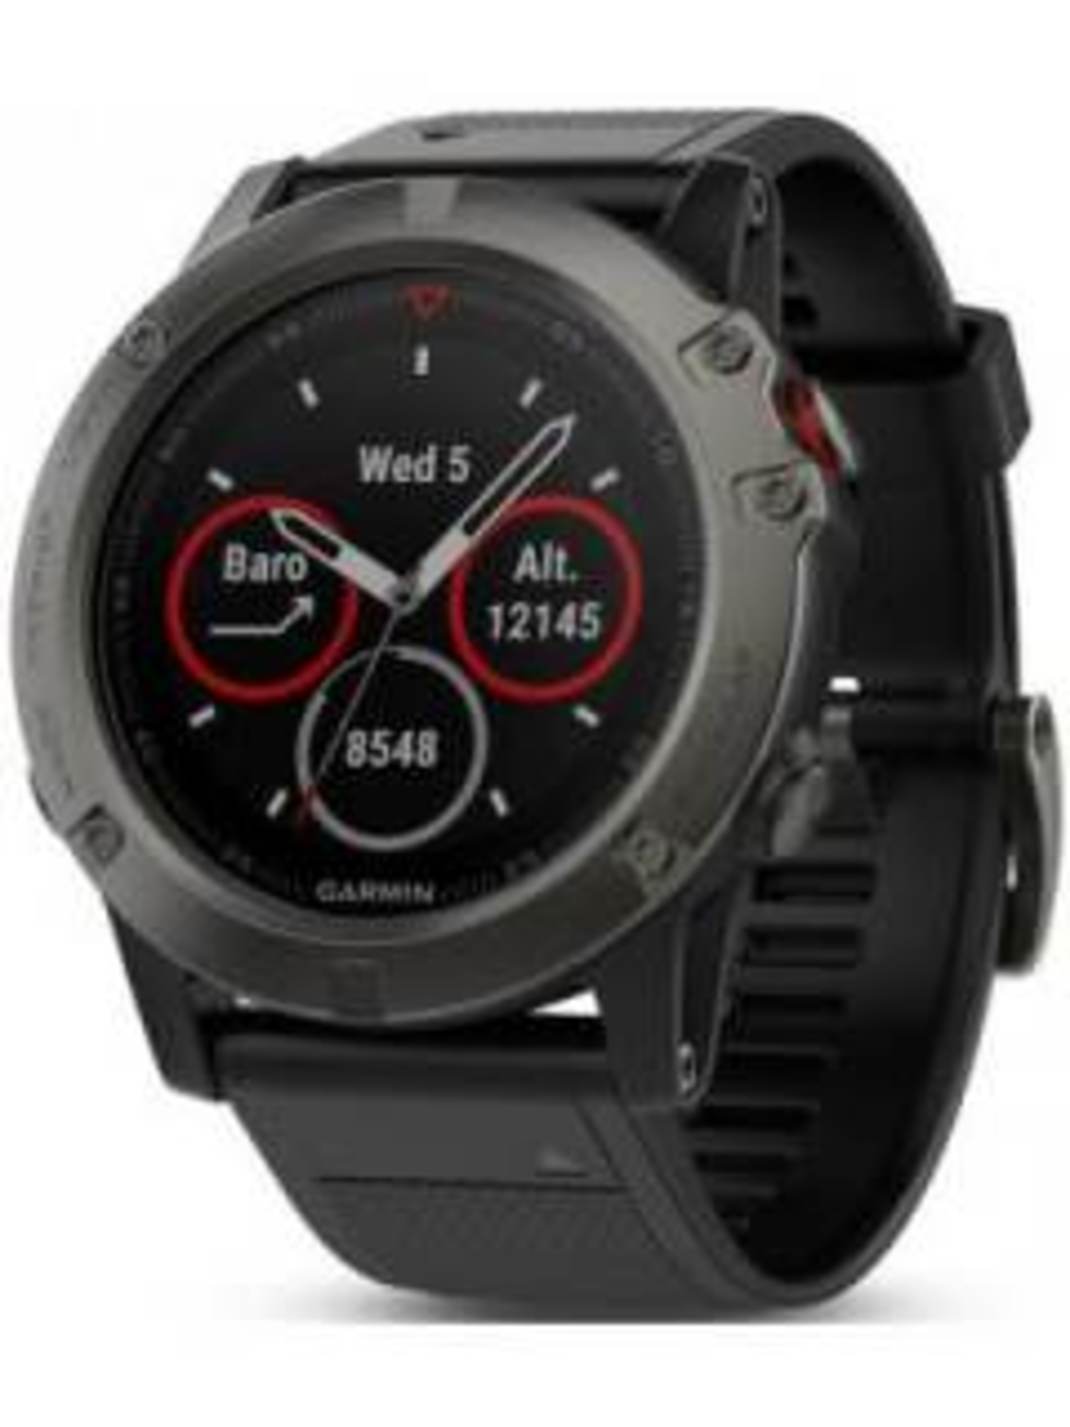 Compare Garmin Fenix 5S vs Garmin Forerunner 645 Music - Fenix 5S vs Garmin Forerunner 645 Music Comparison by Price, Specifications, Reviews &amp; Features | Gadgets Now